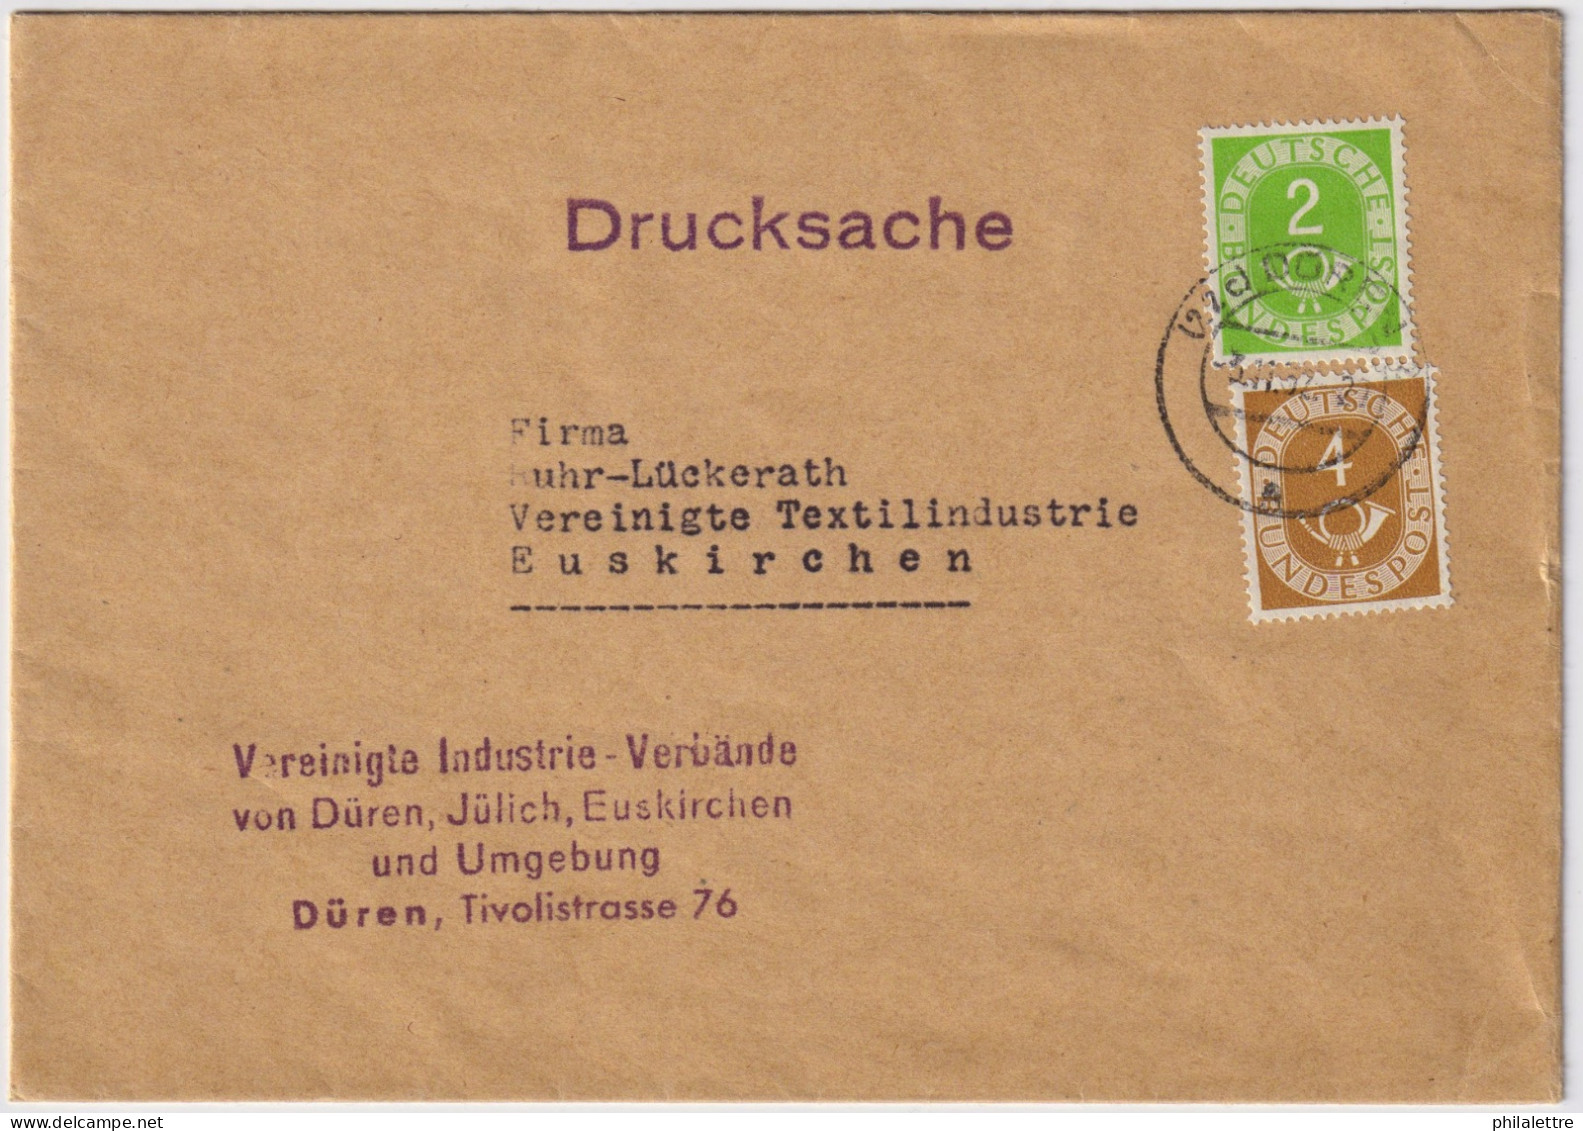 ALLEMAGNE / GERMANY - 1953 - Mi.123 & Mi.124 2pf. & 4pf. On Printed Matters (Drucksache) Cover From Düren To Euskirchen - Lettres & Documents